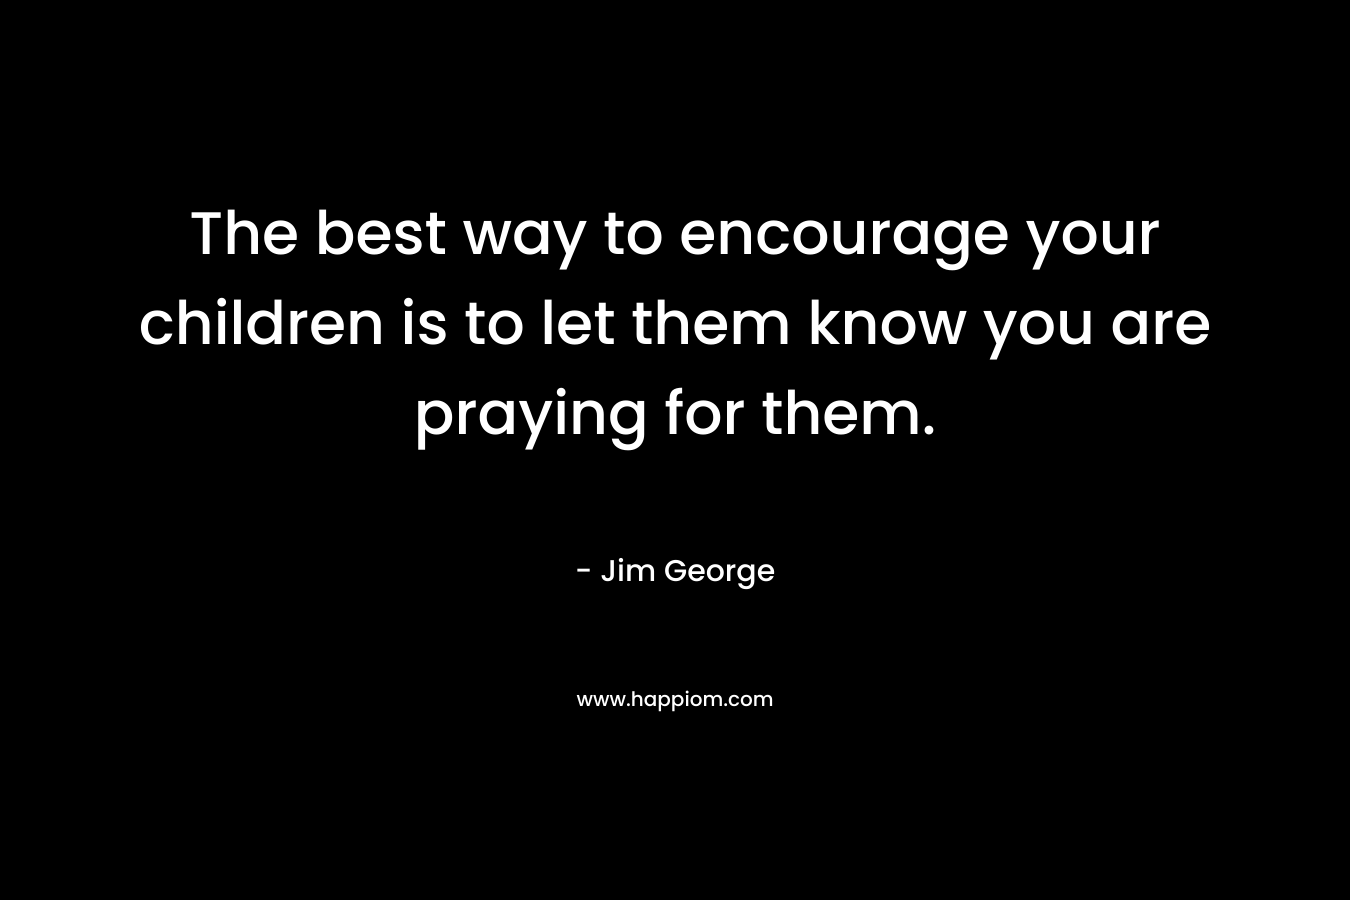 The best way to encourage your children is to let them know you are praying for them.